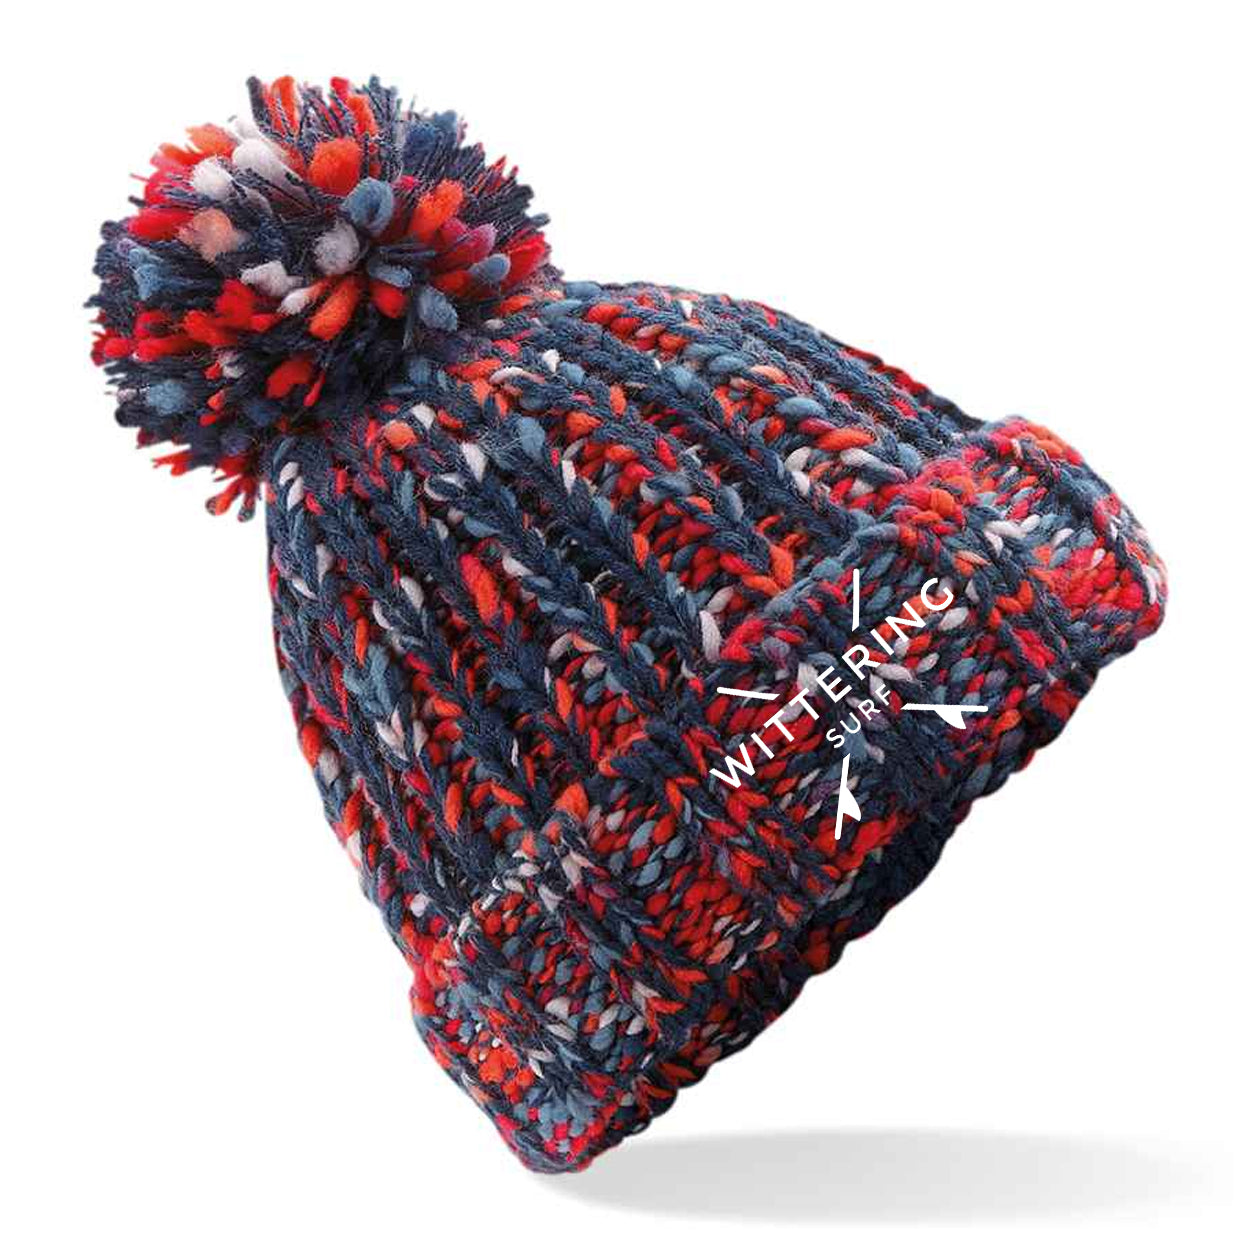 STORM CHASER BEANIE - CAMP FIRE NIGHTS - Wittering Surf Shop